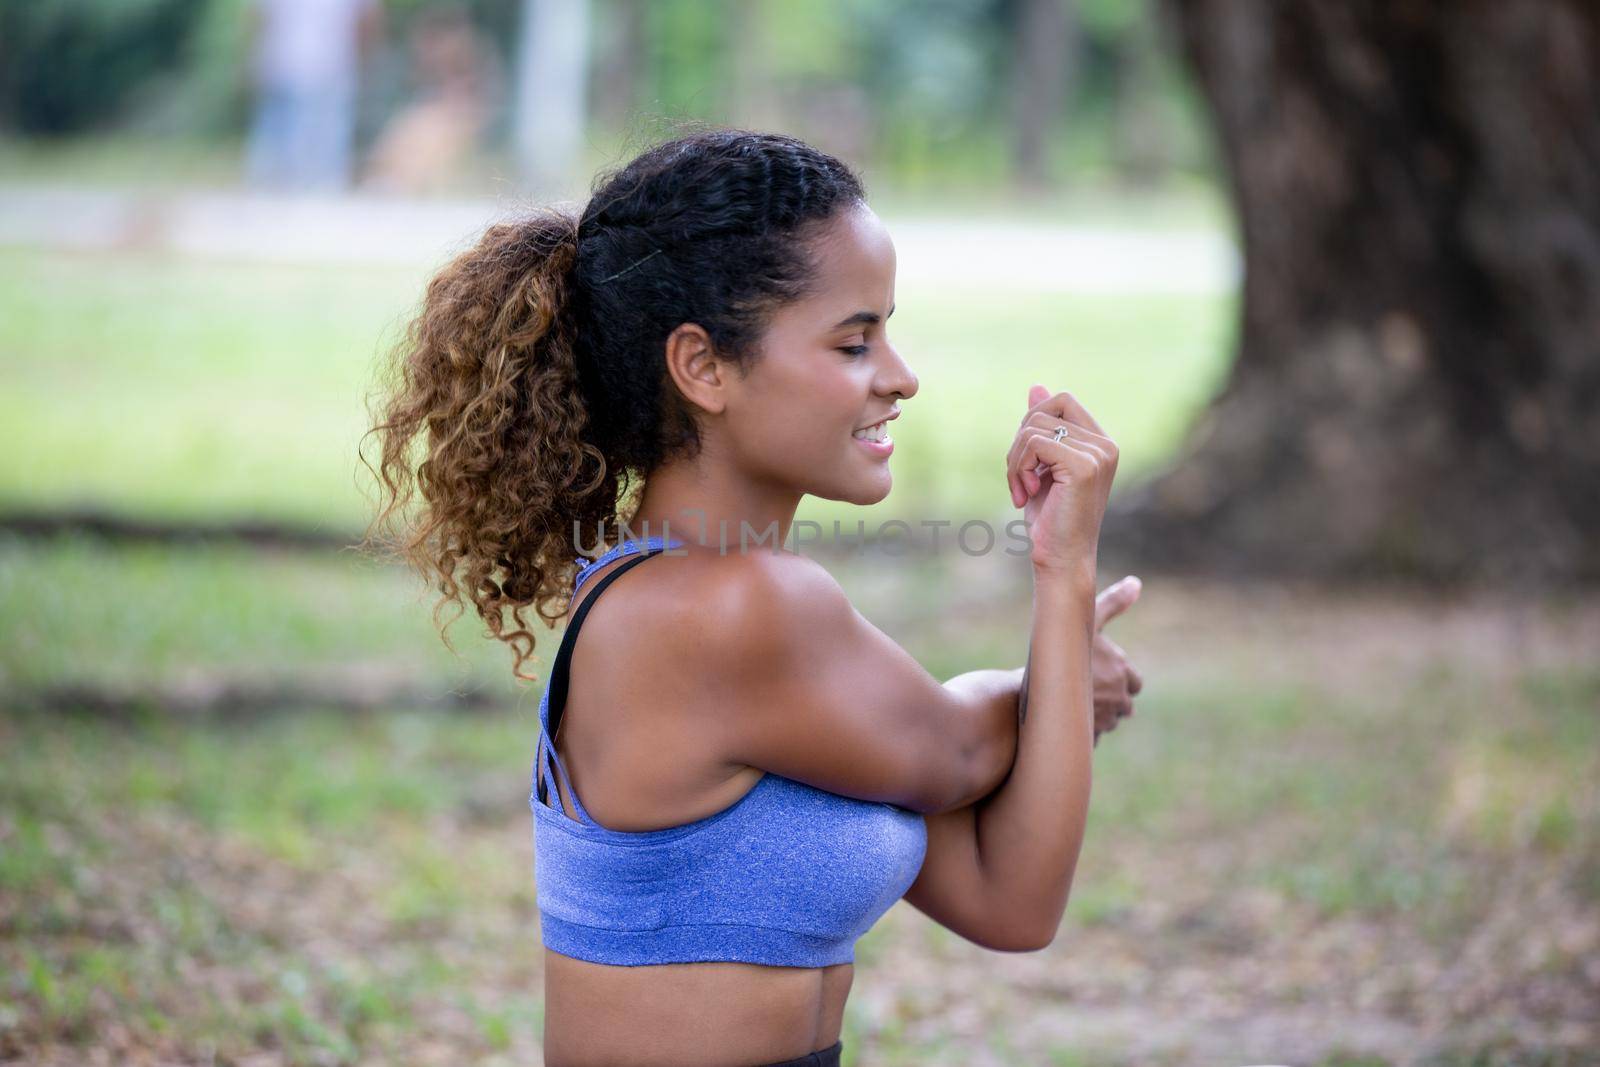 Young attractive smiling woman practicing yoga pose, working out, wearing sportswear pants, bra, full length, outdoor.